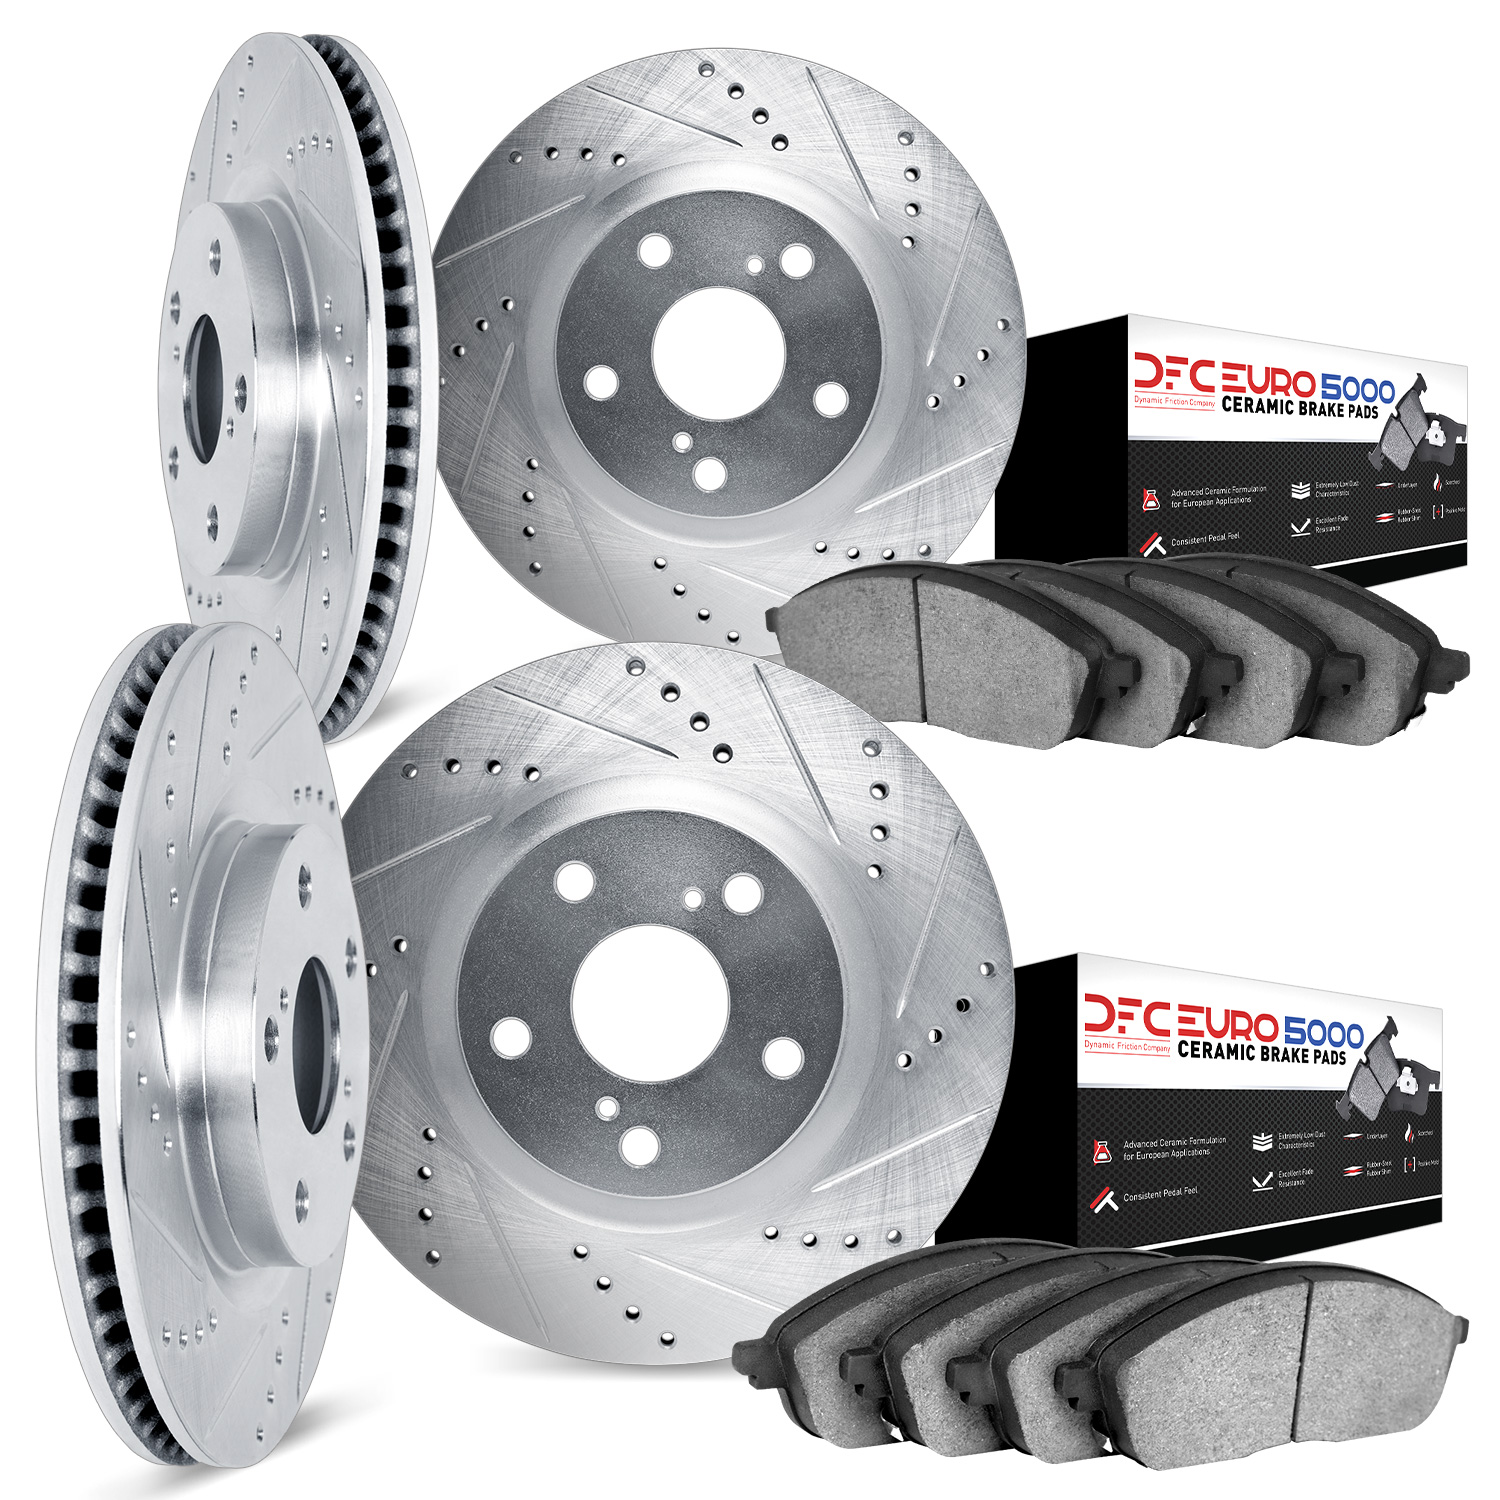 7604-11004 Drilled/Slotted Brake Rotors w/5000 Euro Ceramic Brake Pads Kit [Silver], 2006-2009 Land Rover, Position: Front and R